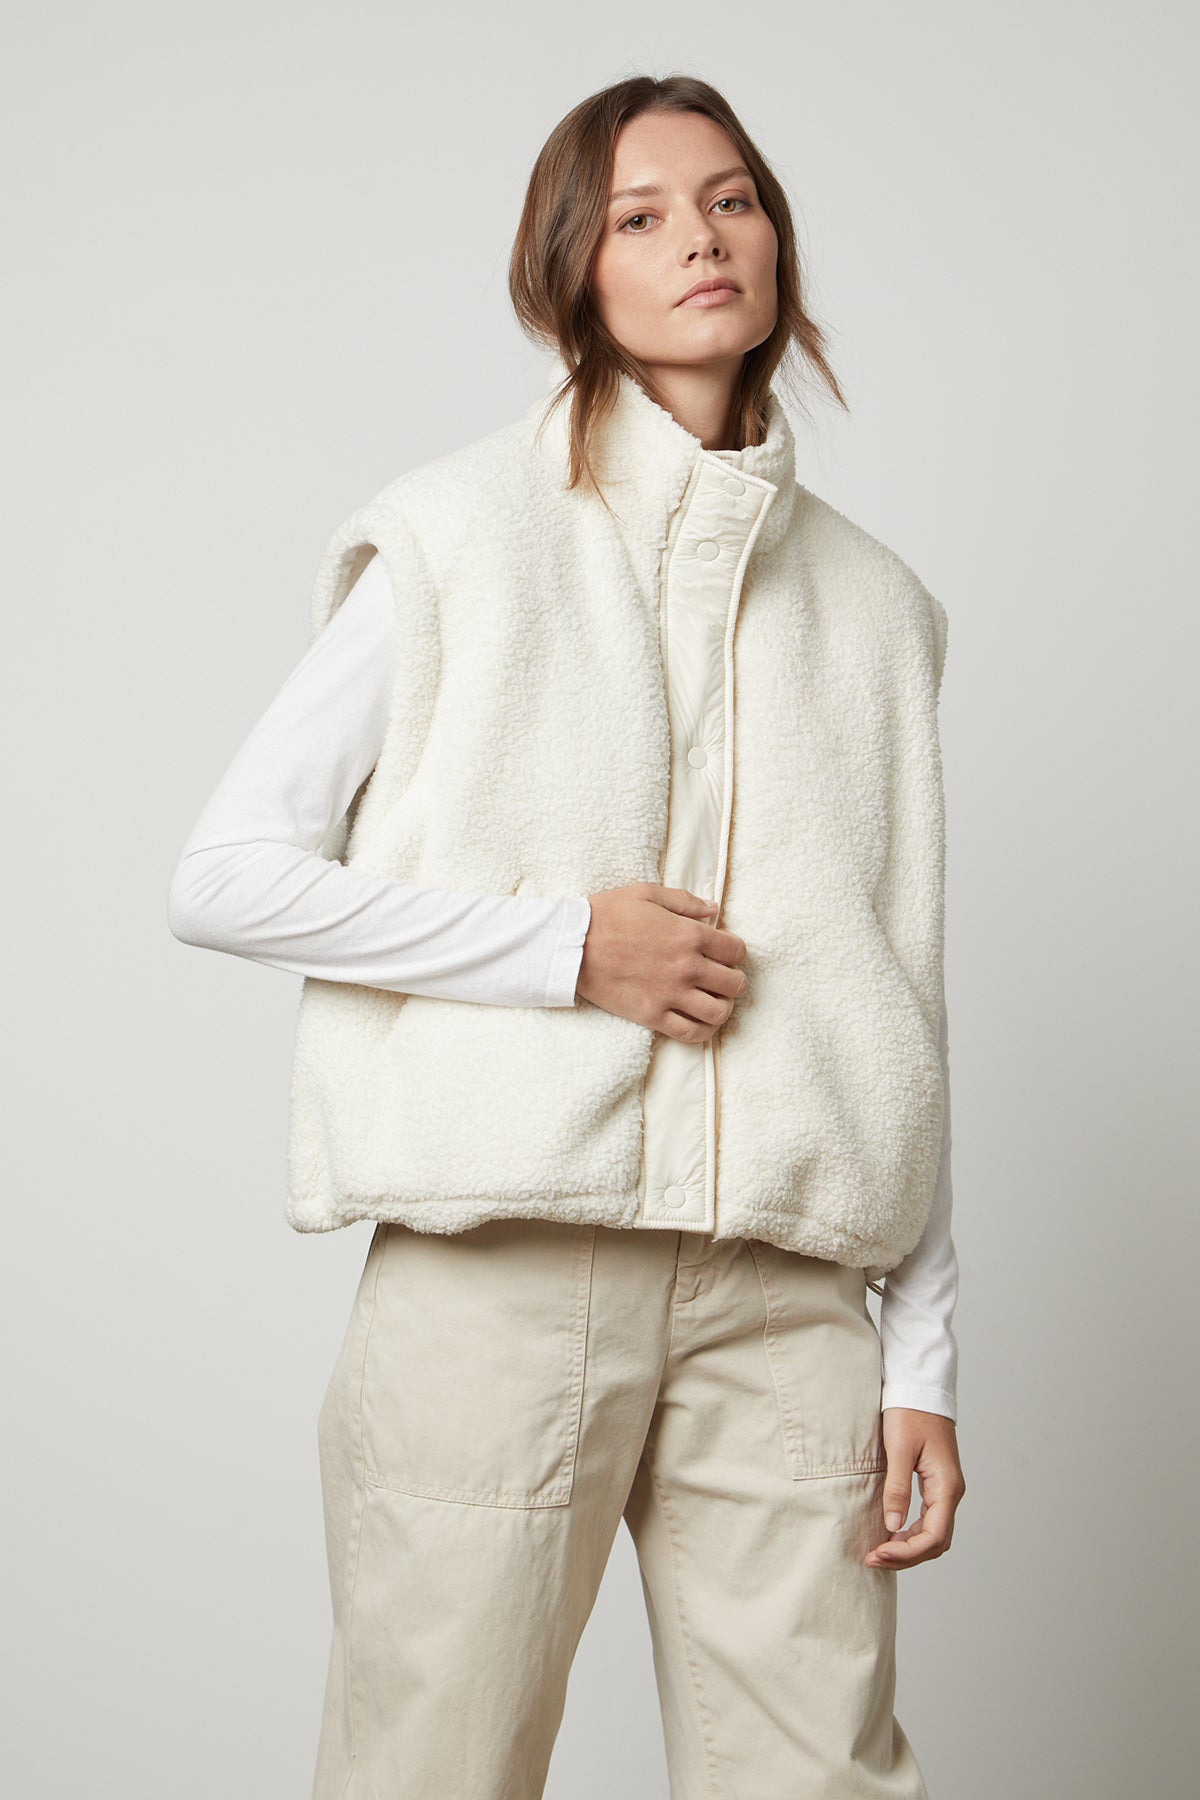 A woman wearing a white Velvet by Graham & Spencer Alicia Reversible Puffer Sherpa Vest designed for cold weather.-35655915110593